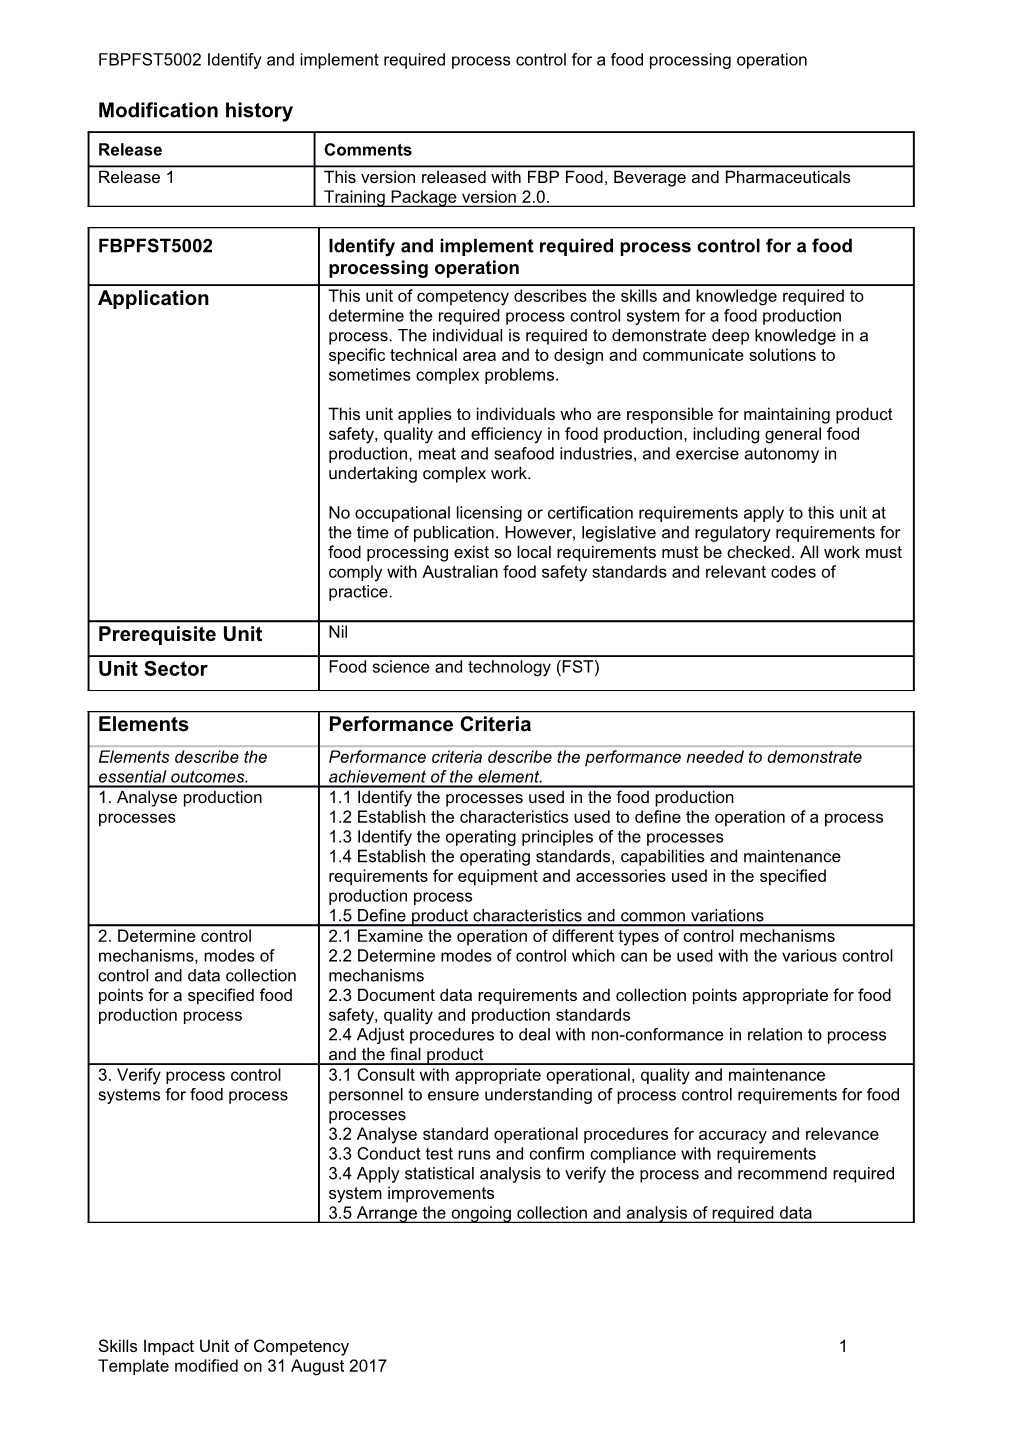 Skills Impact Unit of Competency Template s24